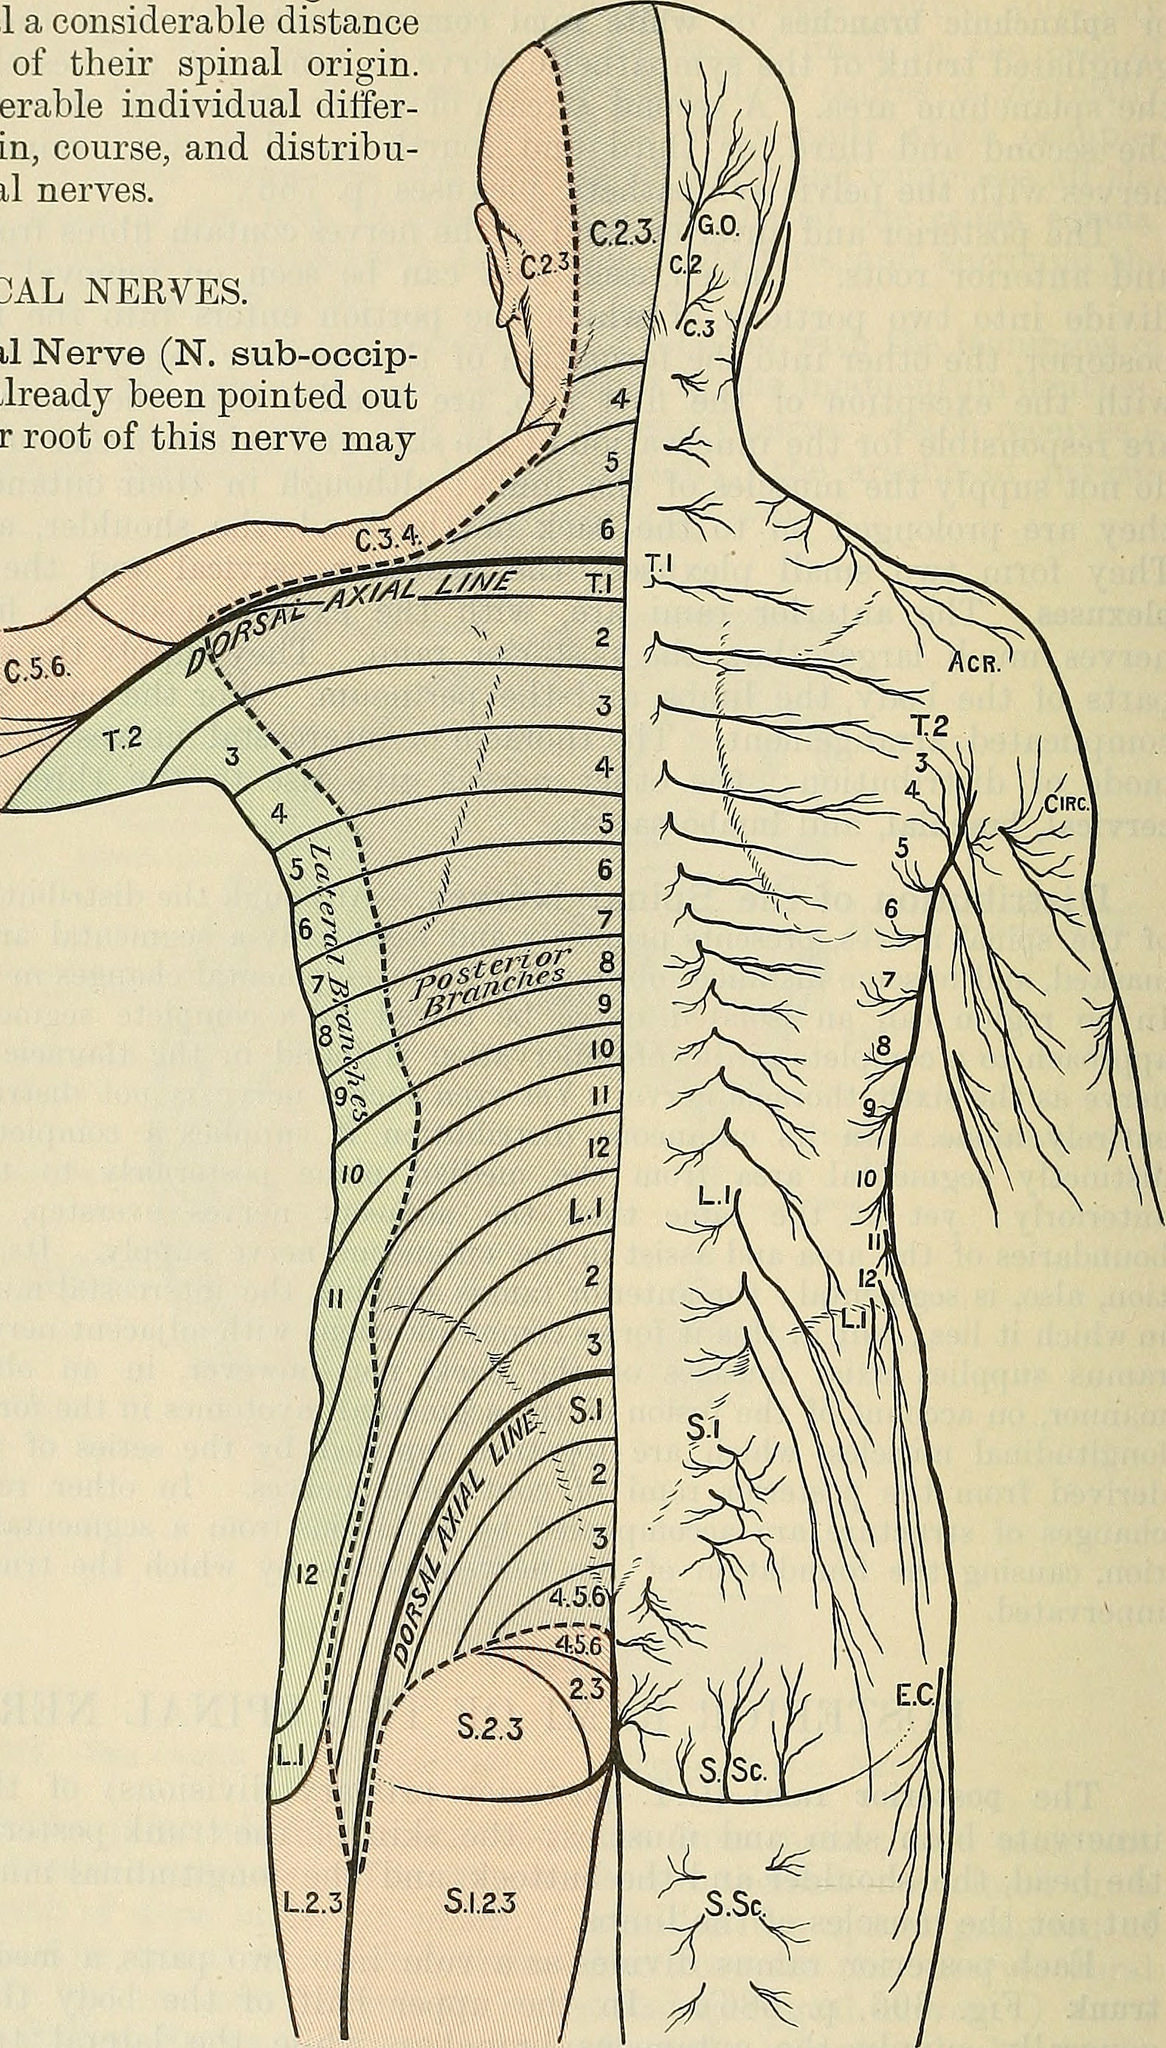 diagram showing thoracic nerve innervation into the abdominal muscles in core strength training